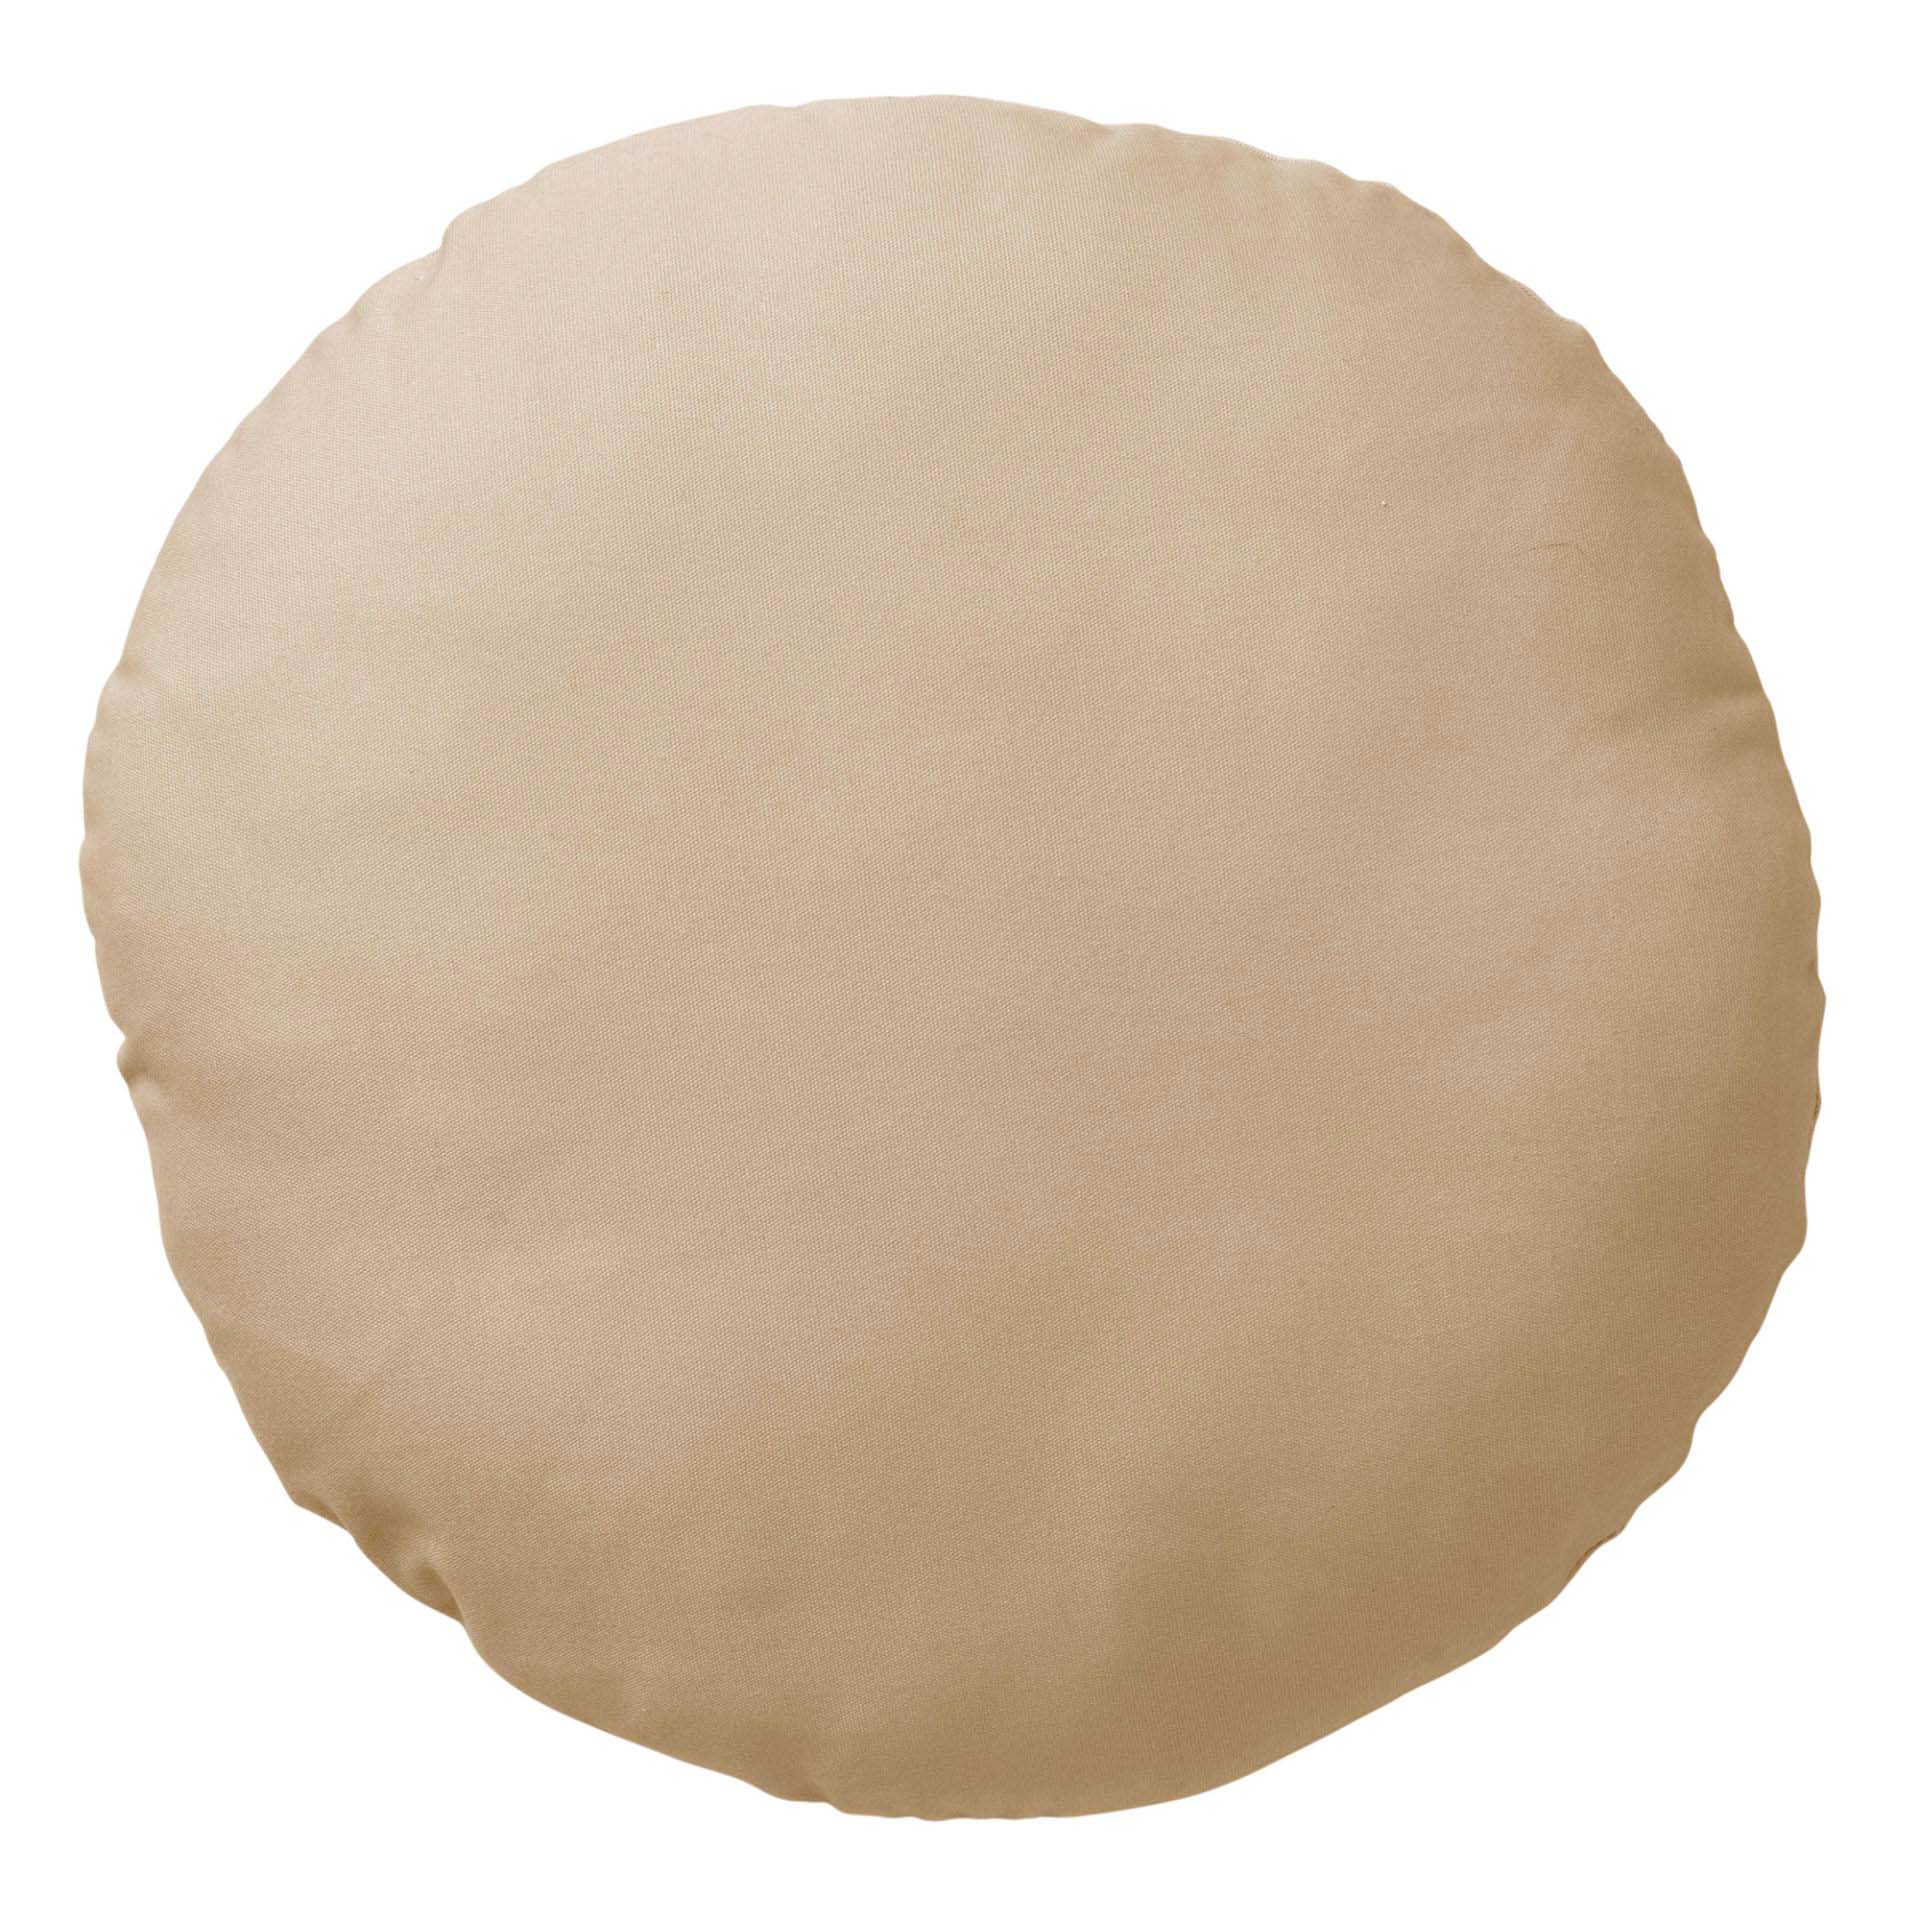 SOL - Cushion round outdoor 40 cm Pumice Stone - water-repellent and uv-resistant - beige